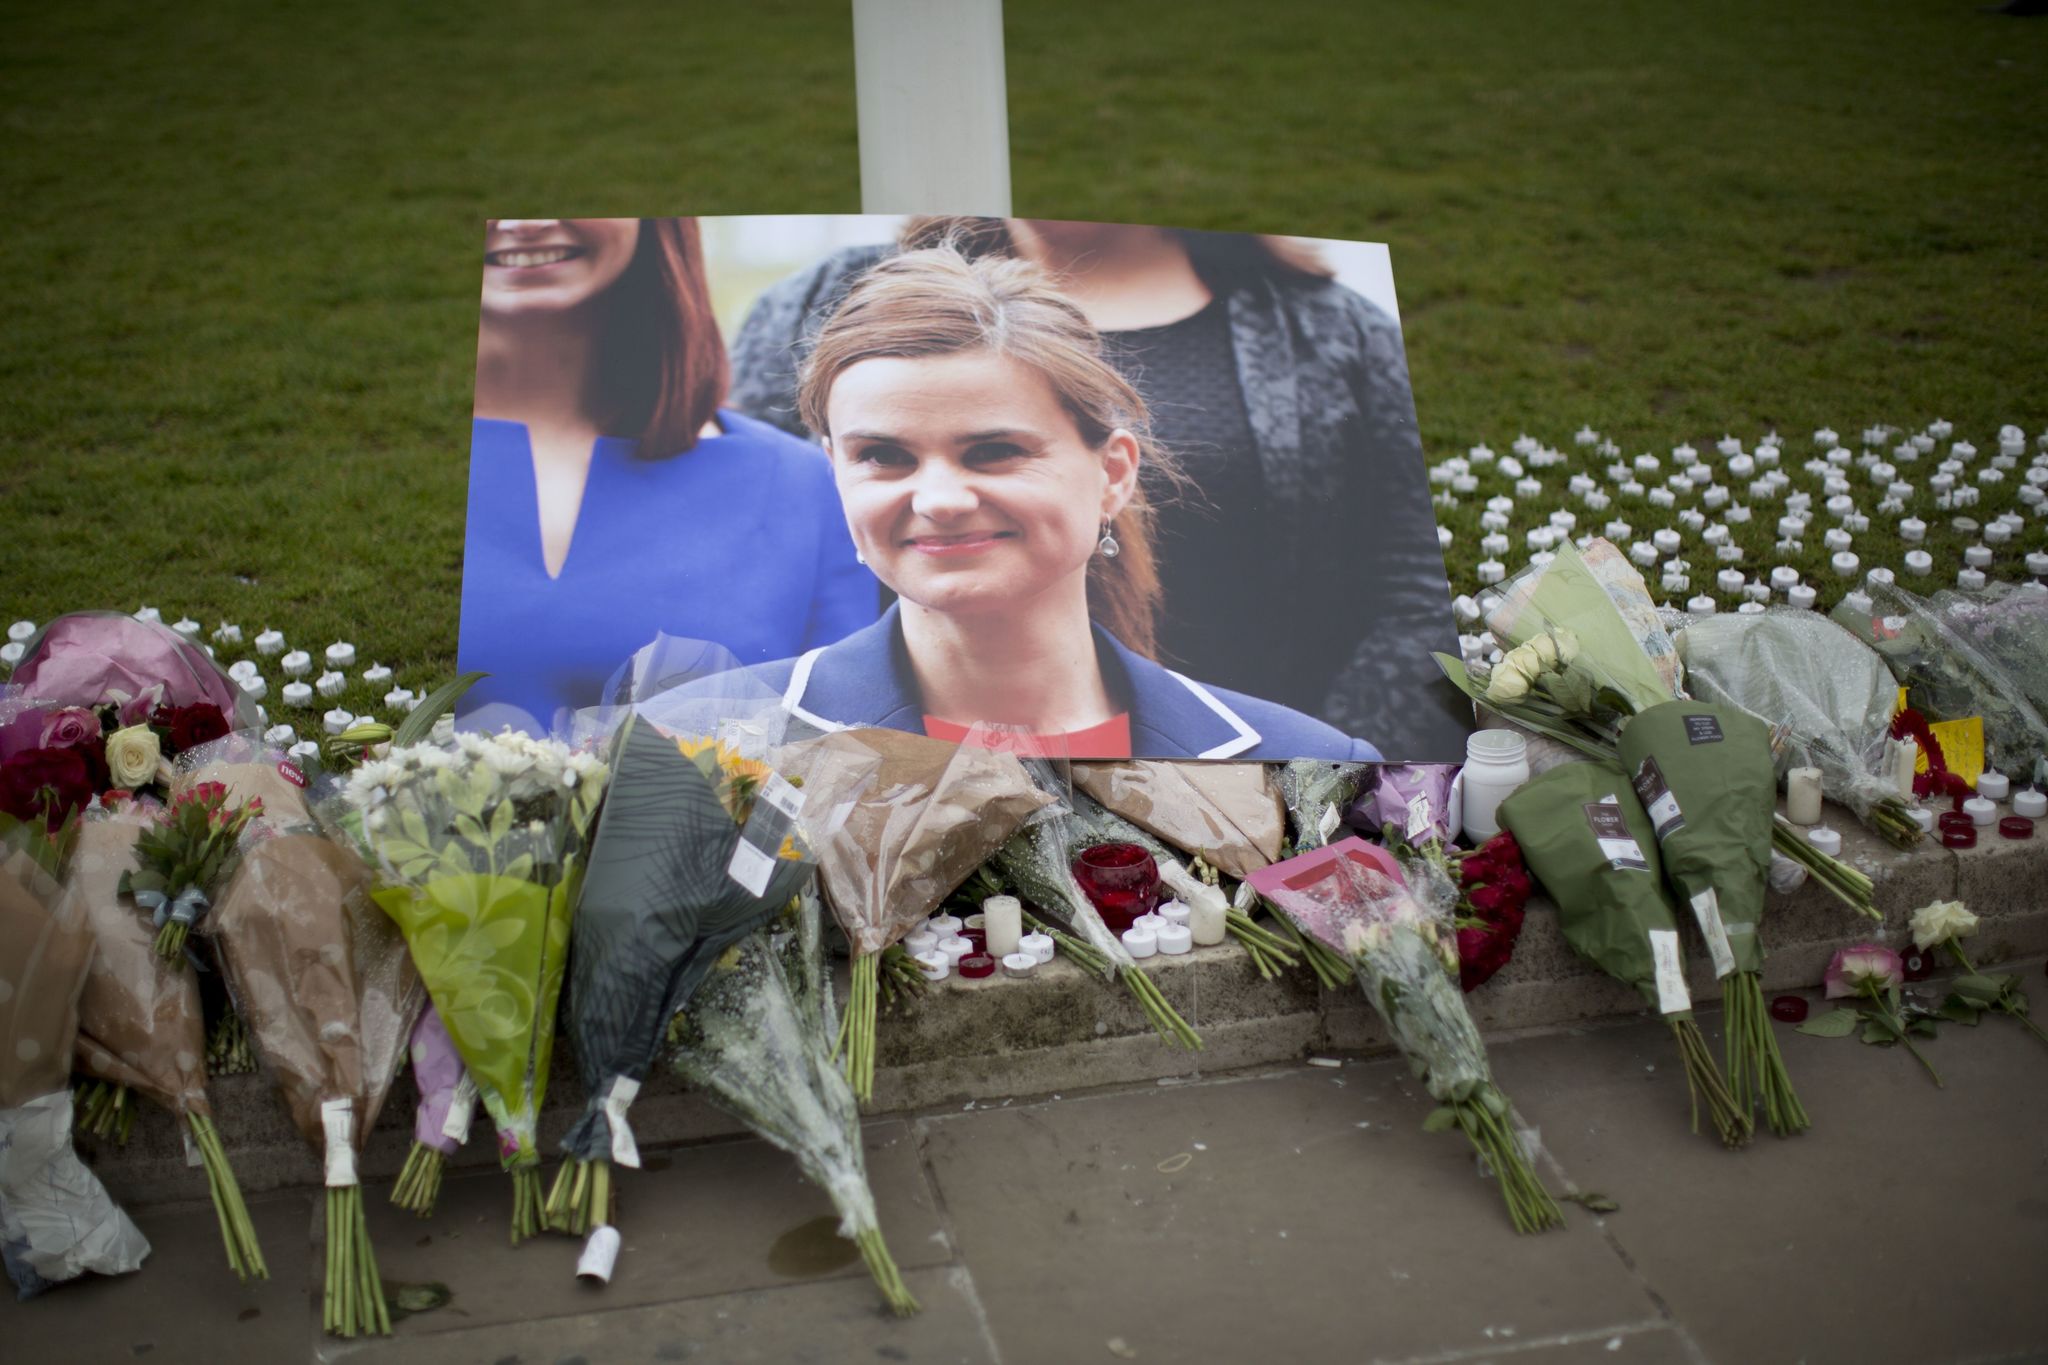 An image and floral tributes for Jo Cox, the 41-year-old British Member of Parliament shot to death yesterday in England, lie outside the House of Parliament in London on Friday.